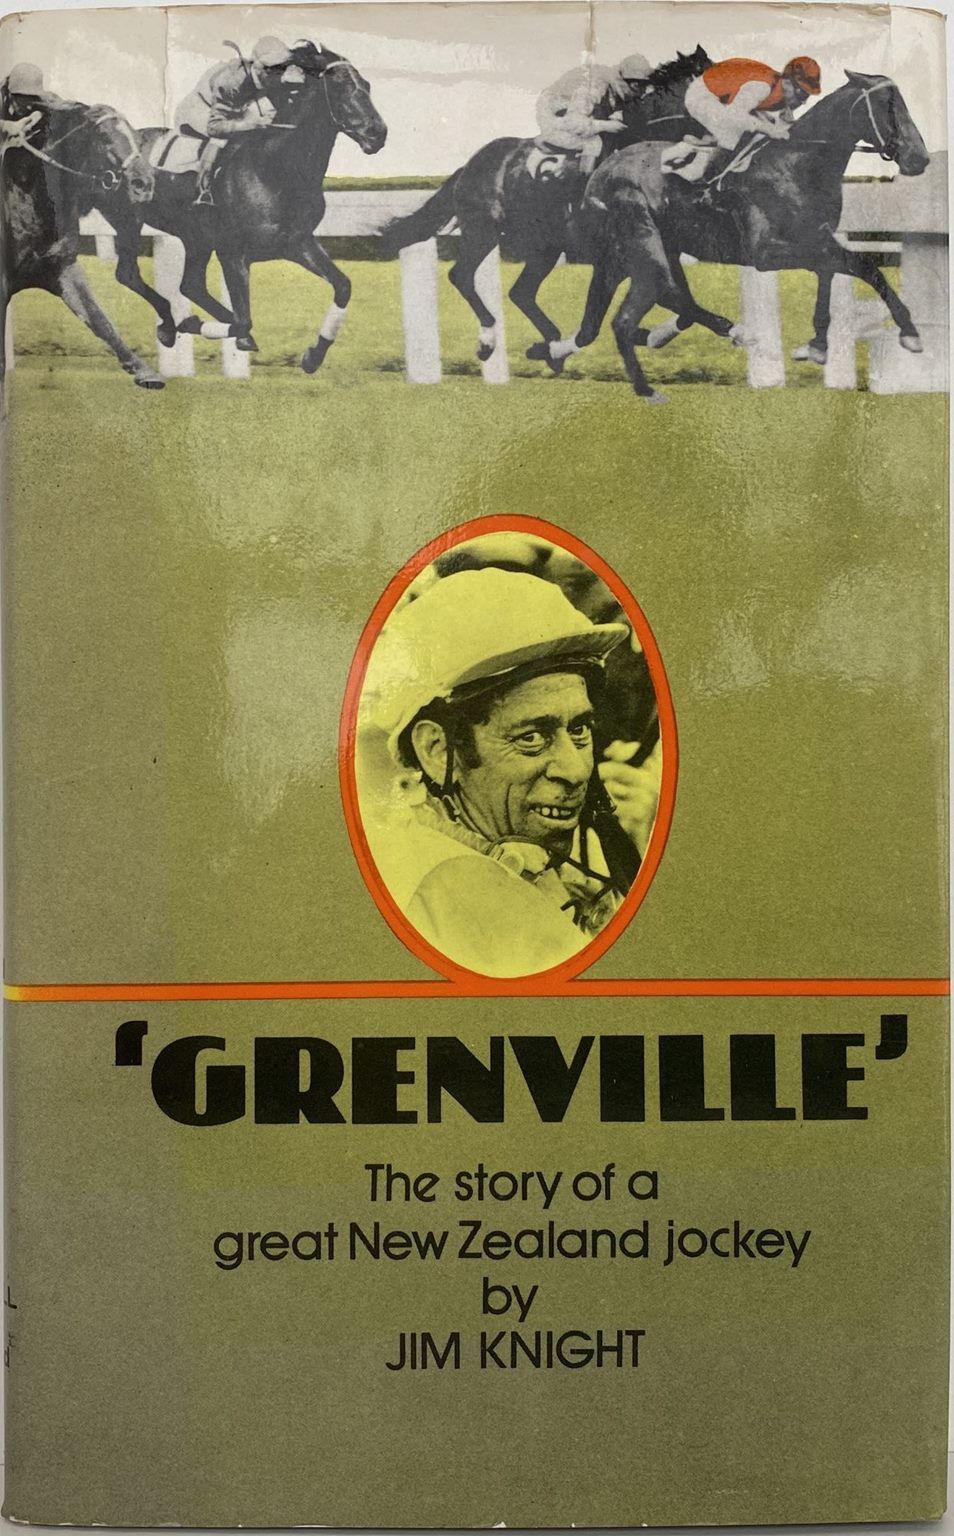 GRENVILLE: The Story of a great New Zealand Jockey